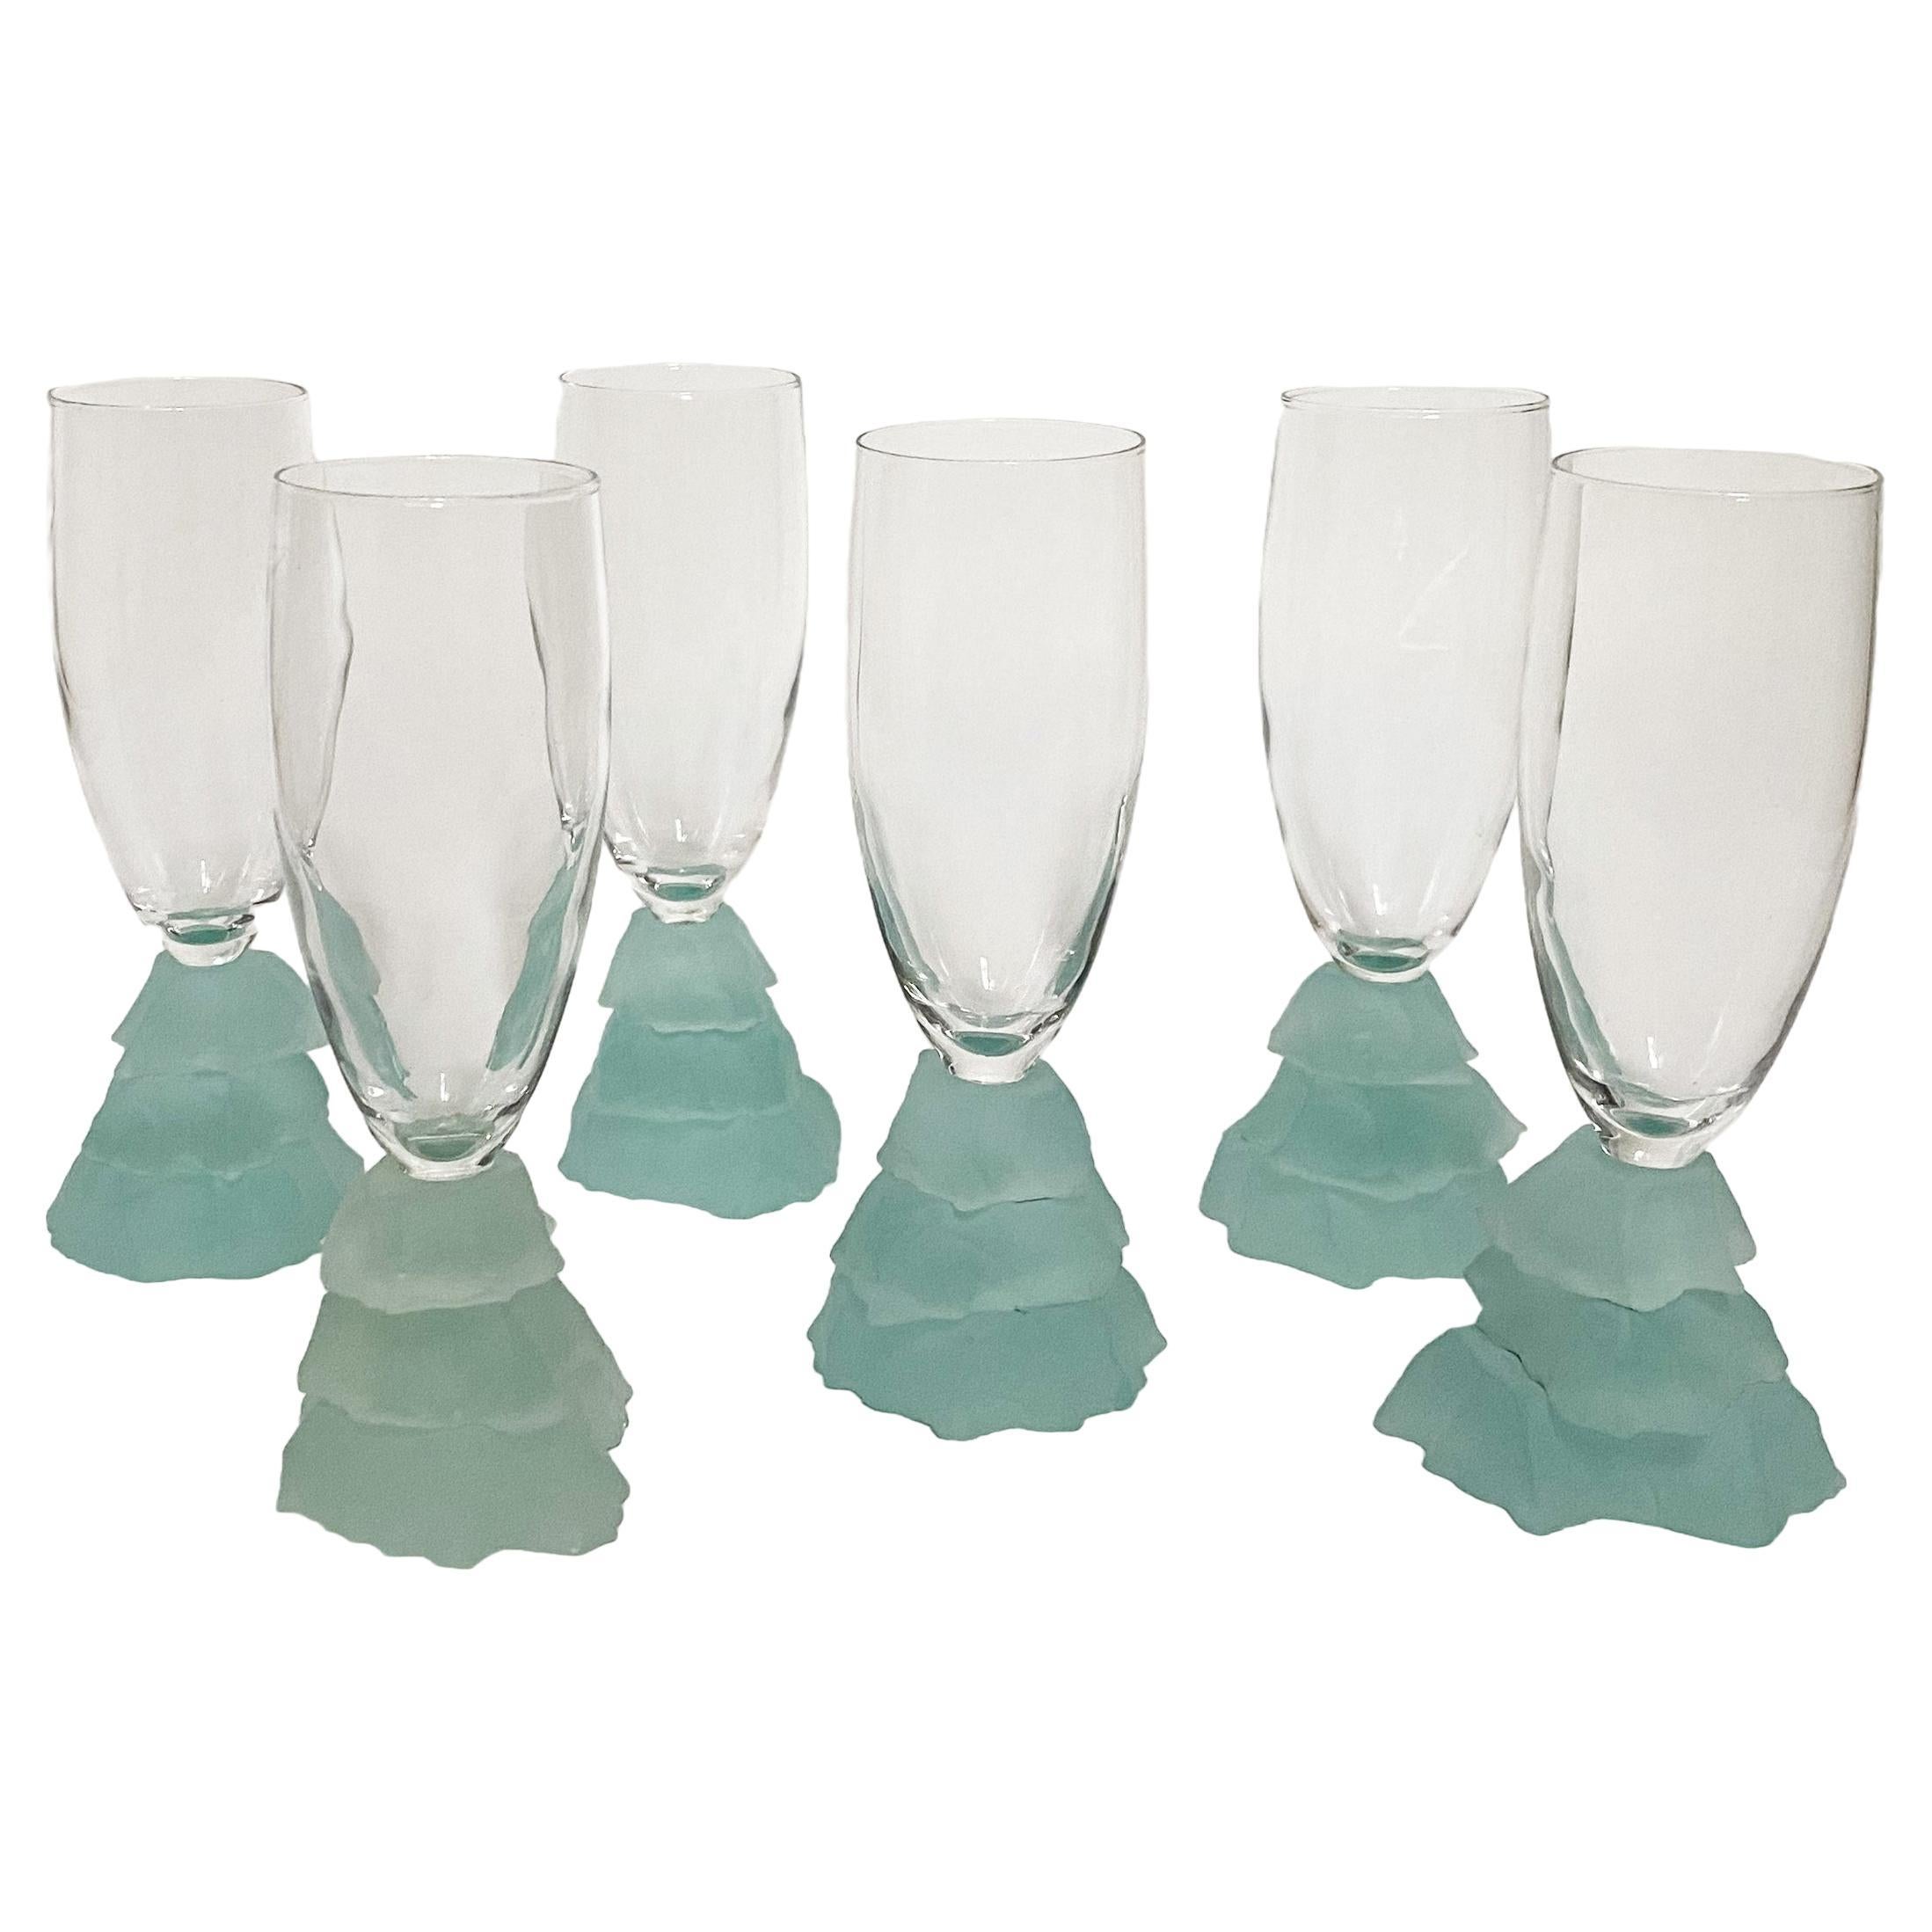 Set of Postmodern "Iceberg" Champagne Flutes Glasses in the Style of Daum, 1980s For Sale